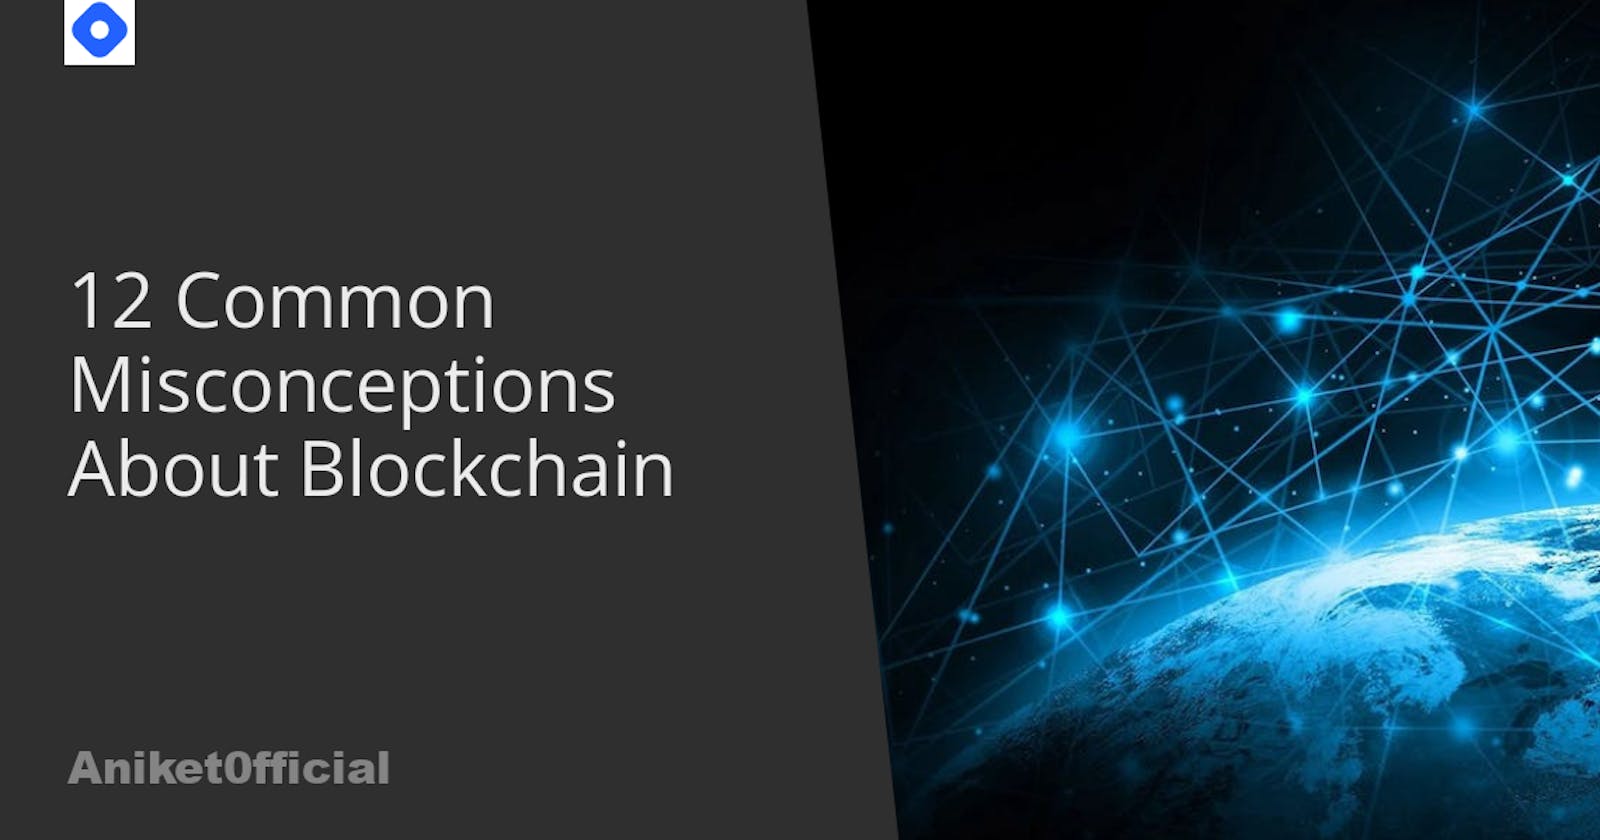 12 Common Misconceptions About Blockchain